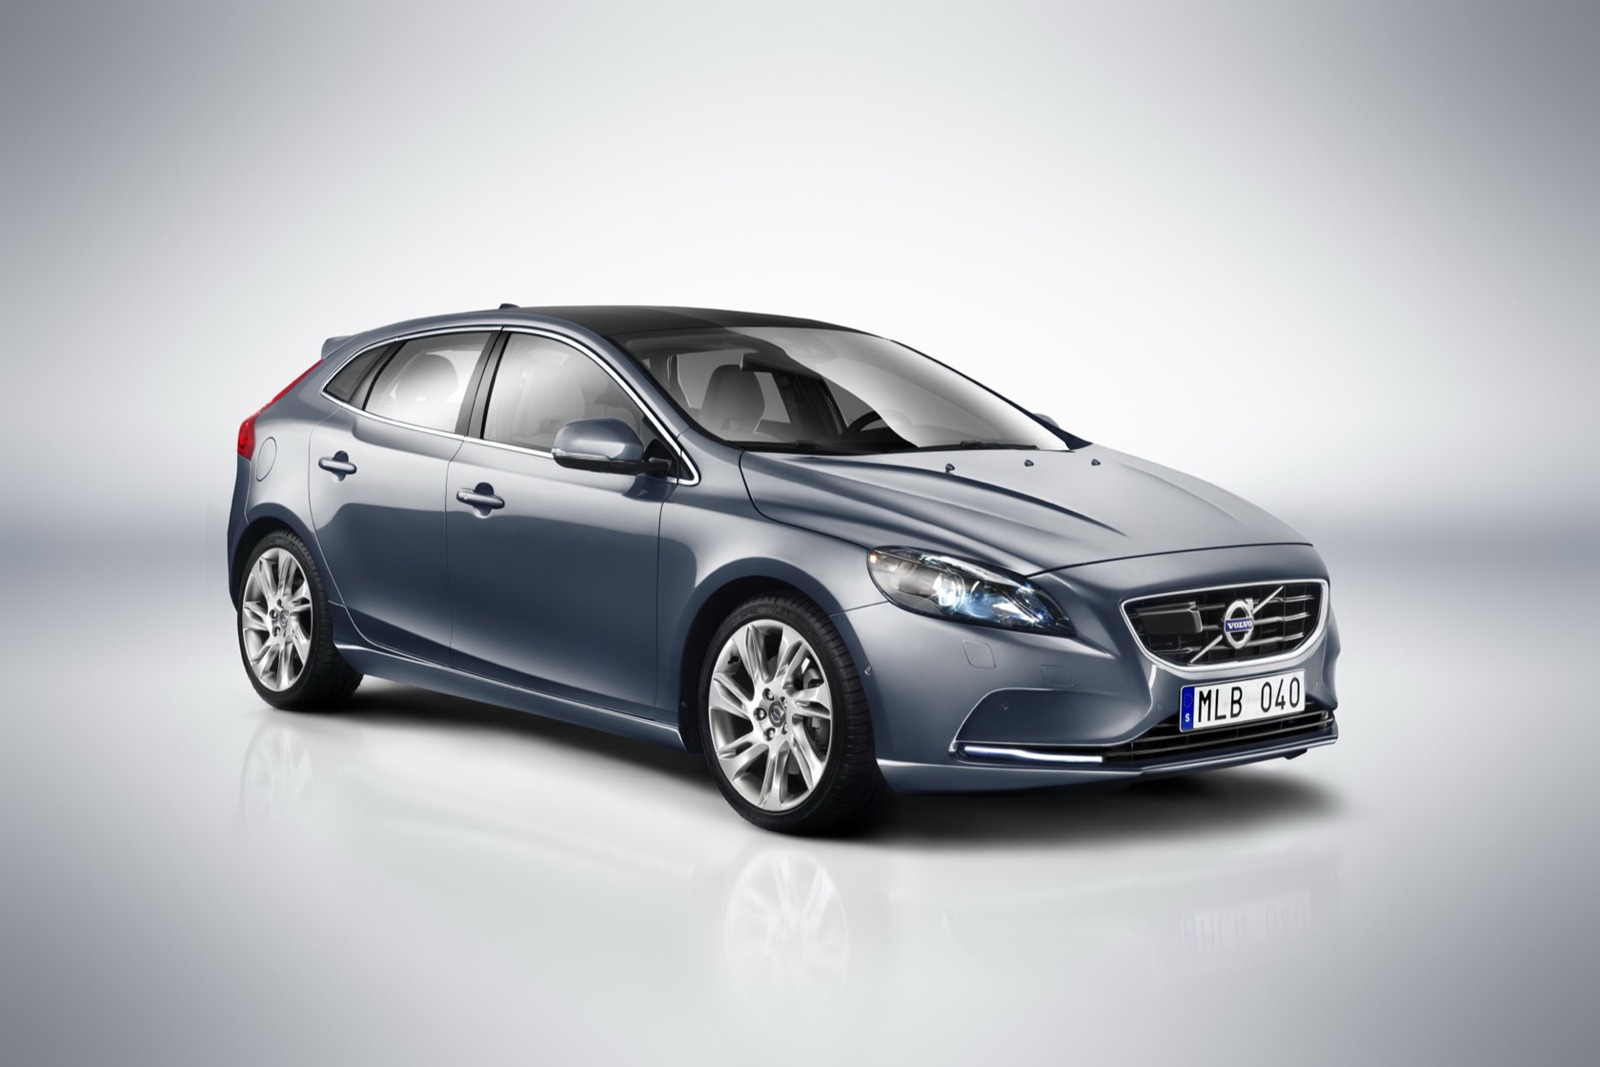 Here are some preliminary high-res photos of the stunning Volvo V40 :)